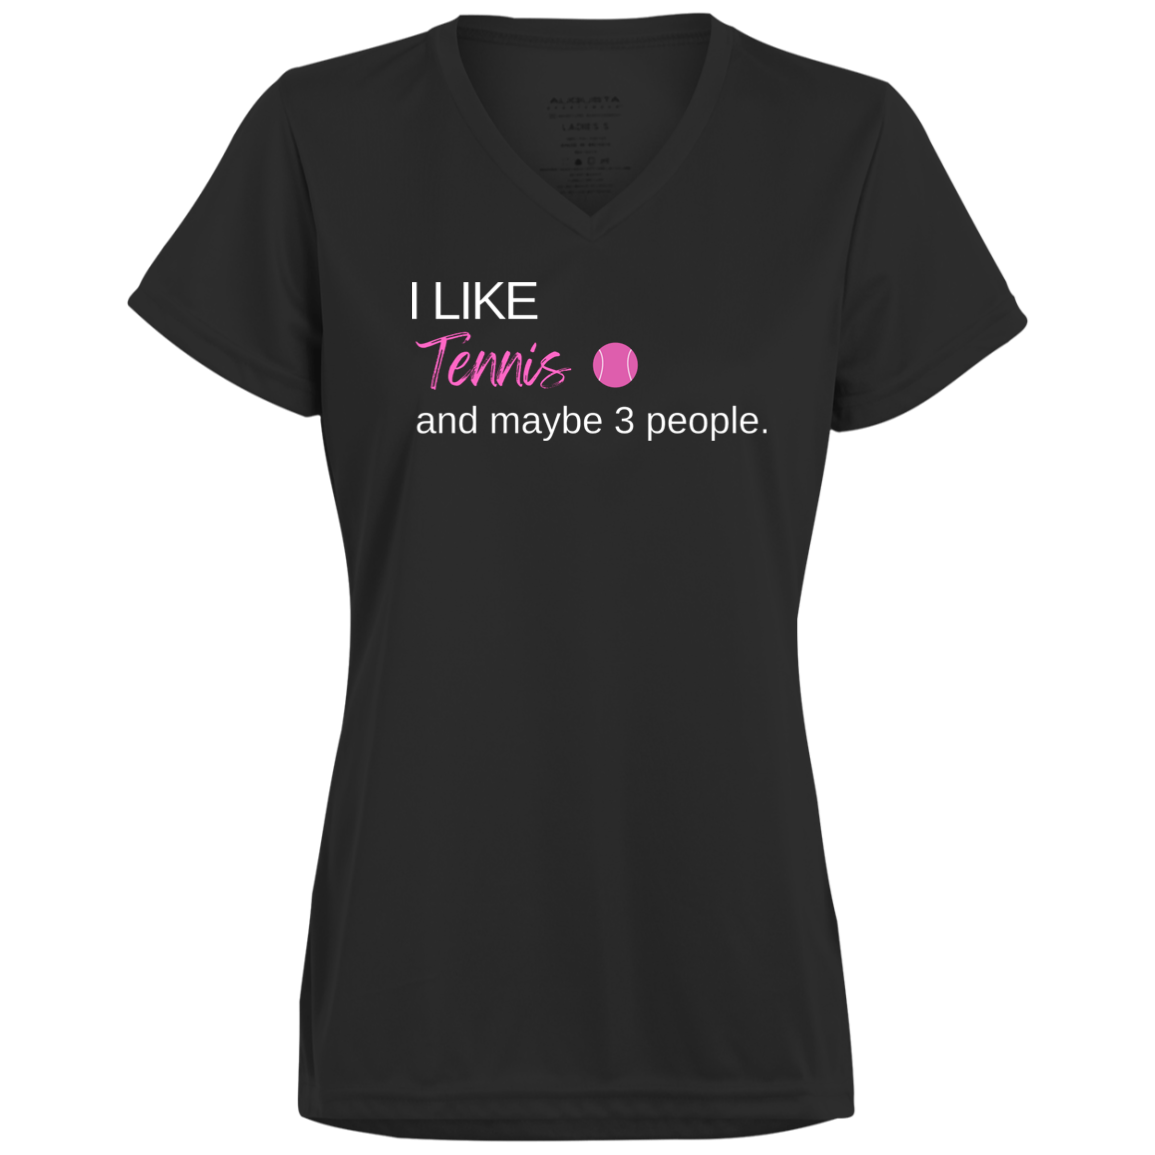 Tennis Women's Short Sleeve  T-Shirt (Performance) - I Like Tennis.. and Maybe 3 People.